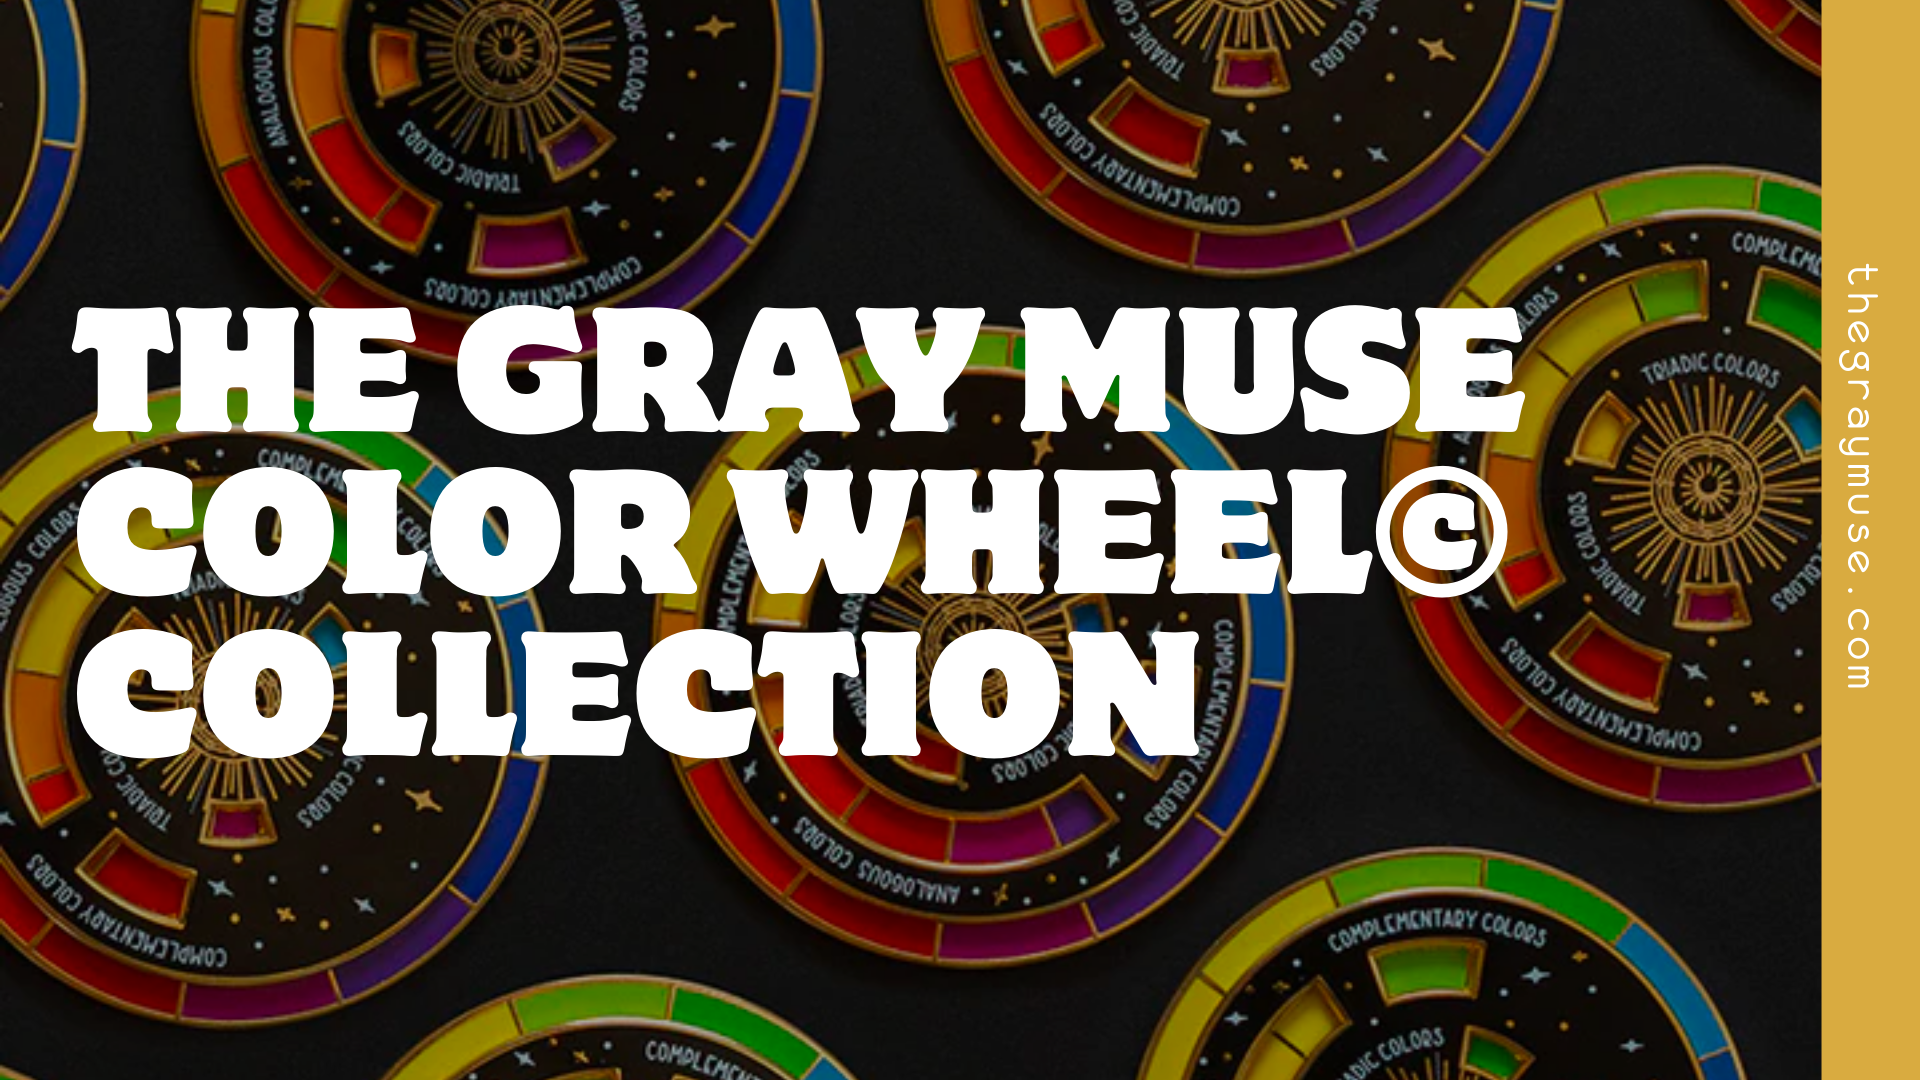 The Gray Muse Color Wheel© Collection